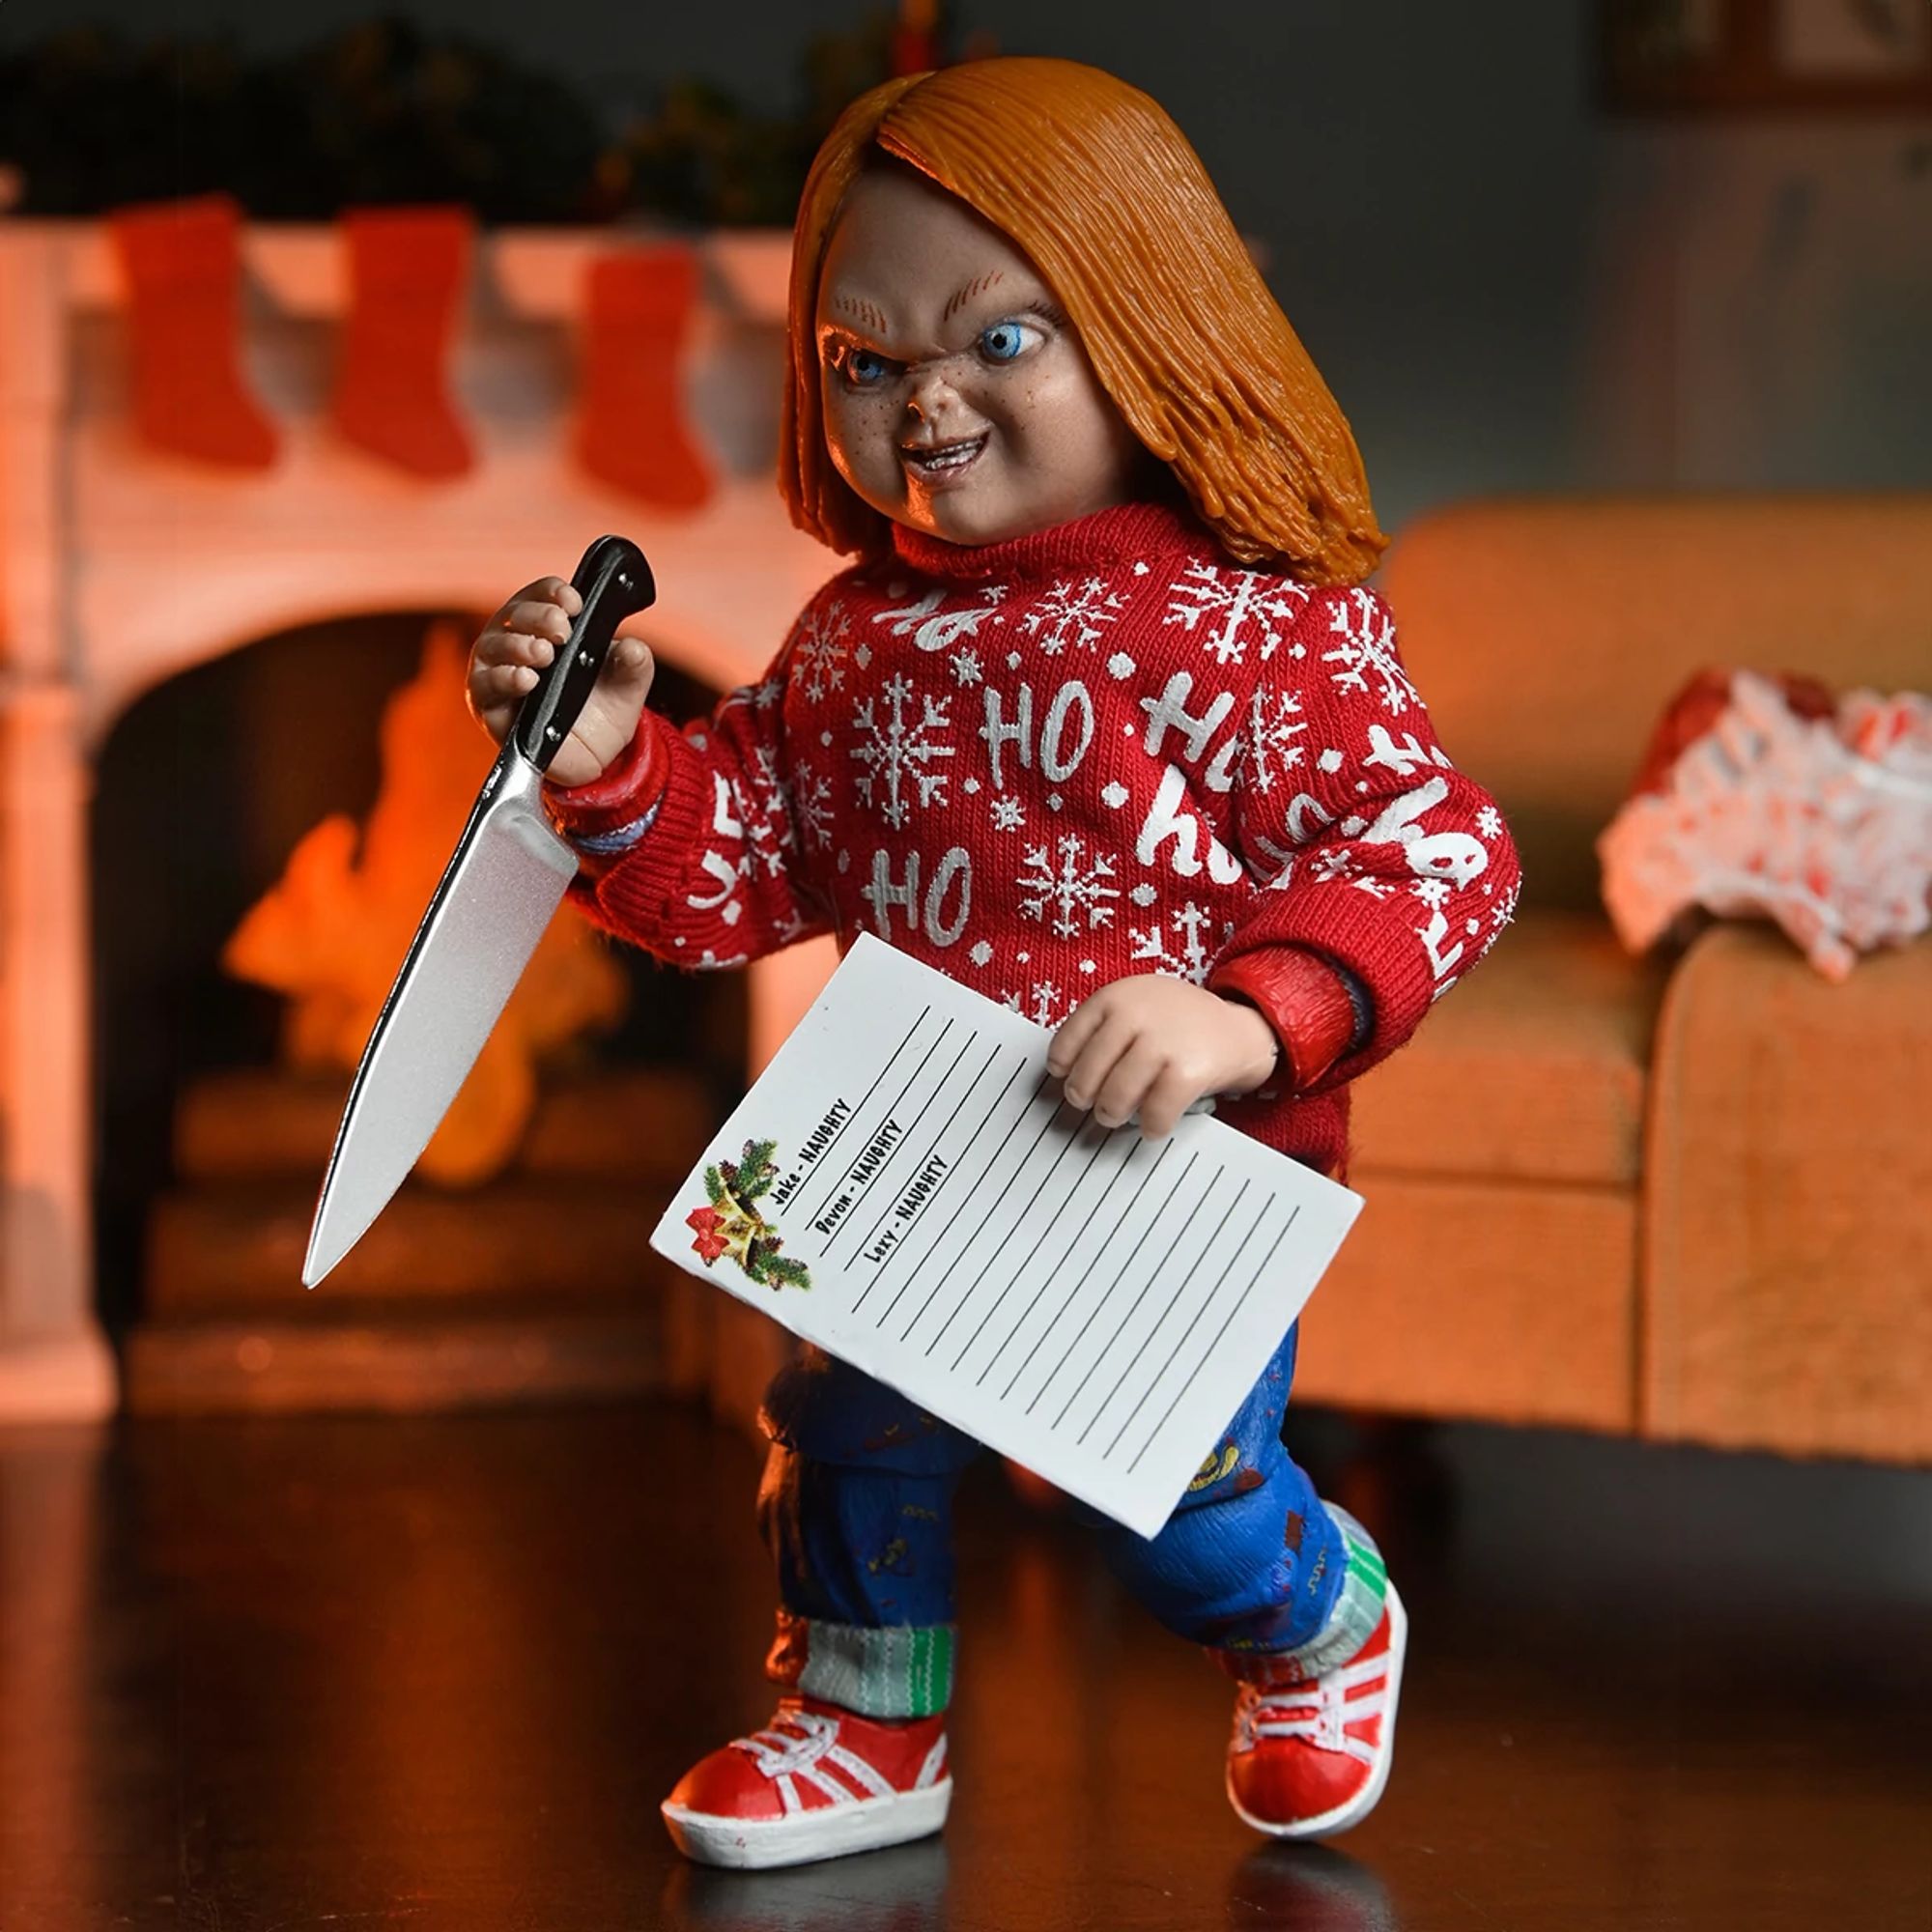 CHUCKY (TV SERIES) – 7” SCALE ACTION FIGURE – ULTIMATE CHUCKY (HOLIDAY EDITION)